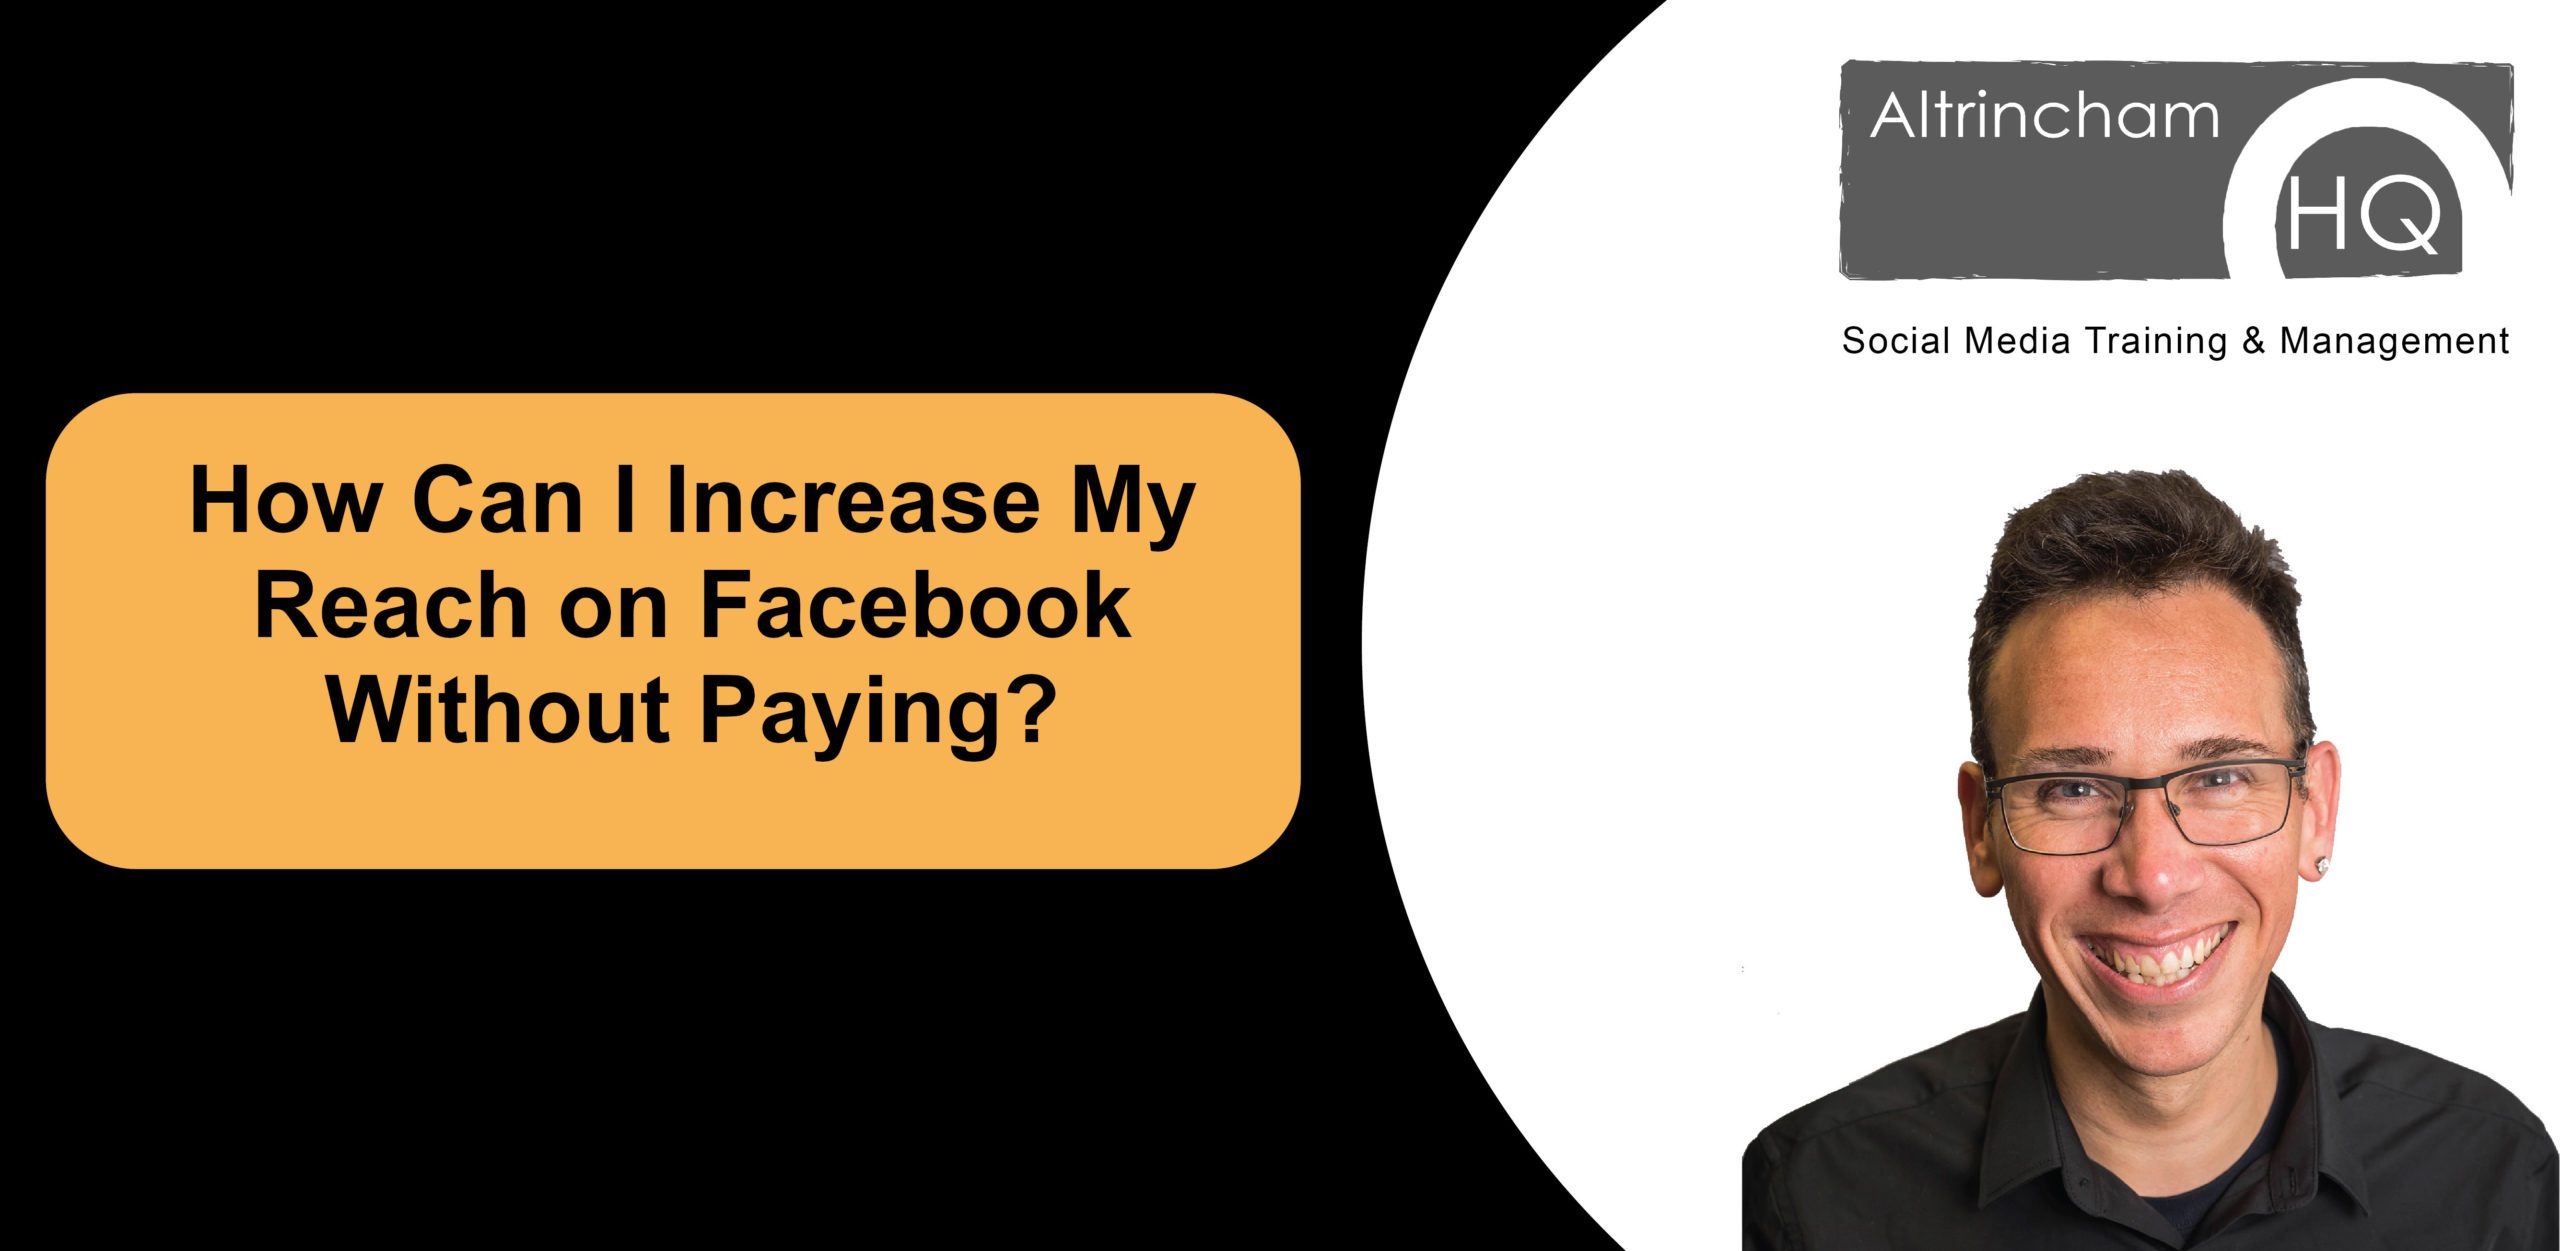 How Can I Increase My Reach on Facebook Without Paying?